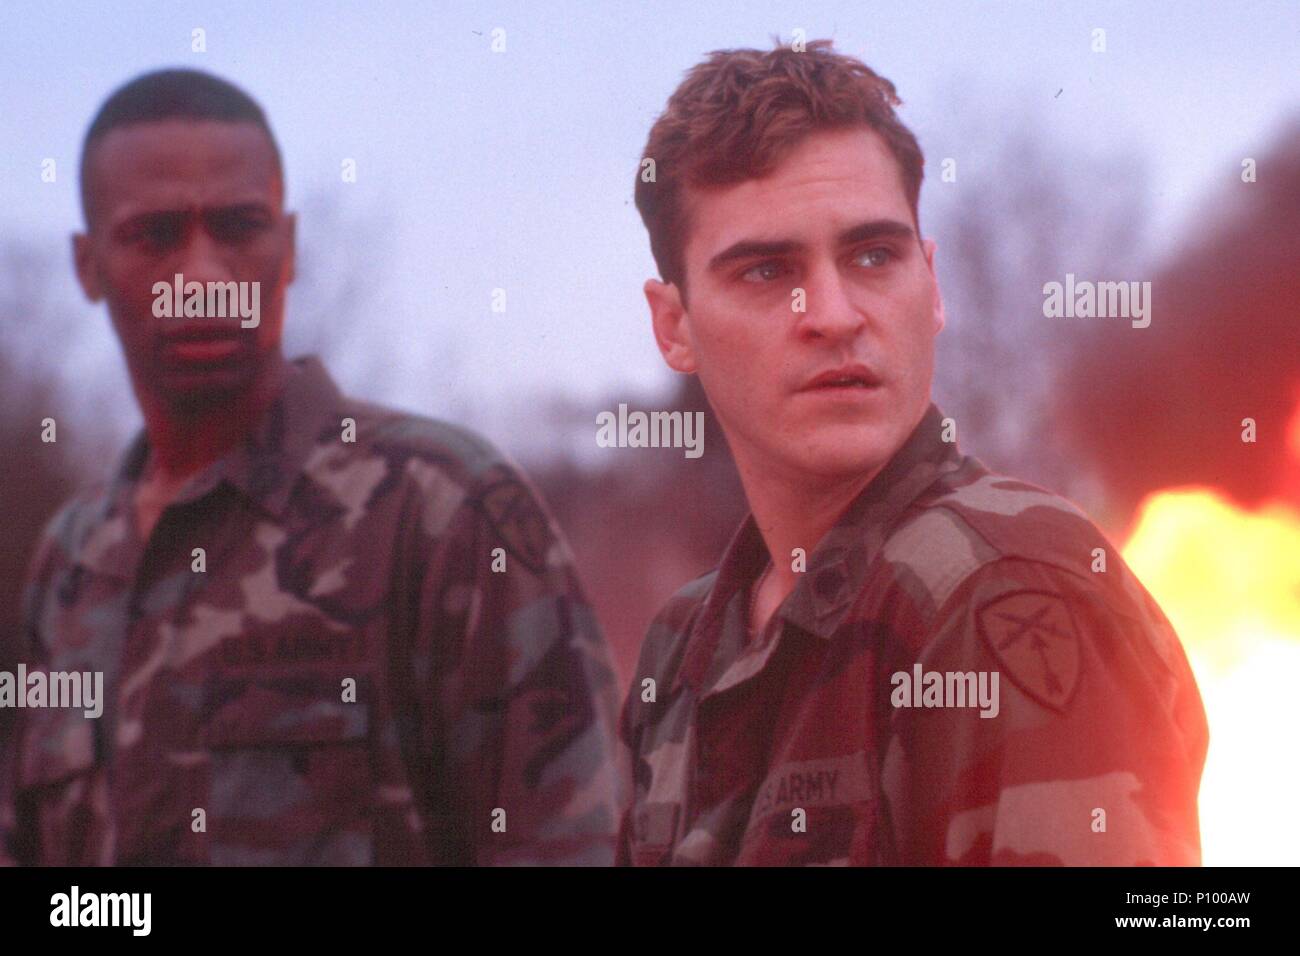 Original Film Title: BUFFALO SOLDIERS. English Title: BUFFALO SOLDIERS. Film  Director: GREGOR JORDAN. Year: 2001. Stars: LEON; JOAQUIN PHOENIX.  Copyright: Editorial inside use only. This is a publicly distributed  handout. Access rights